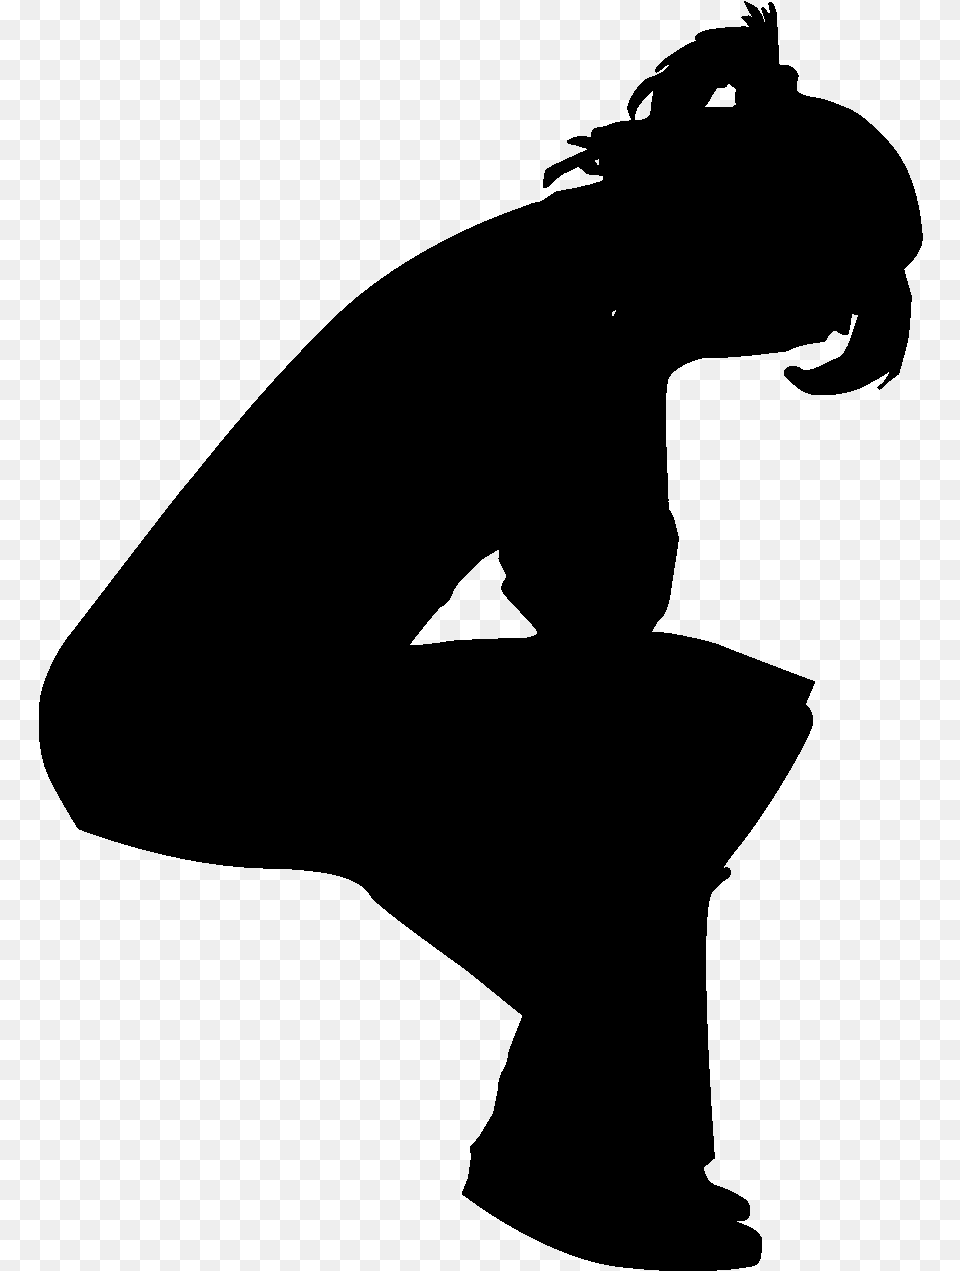 Silhouette Woman Crying Clip Art Woman Crying Silhouette Gray Free Transparent Png